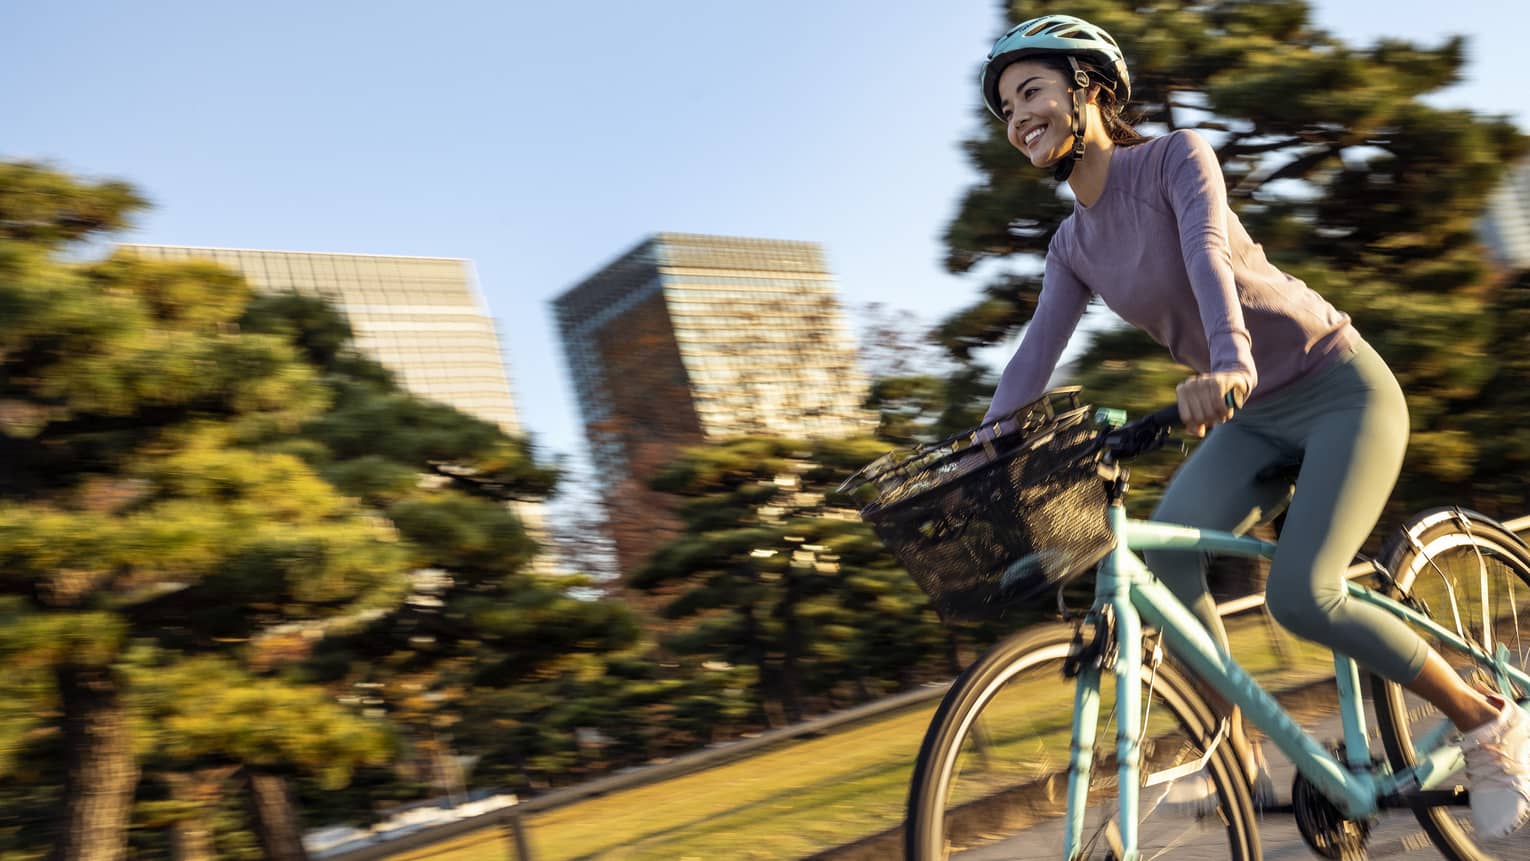 Smiling woman on teal cruiser bike with matching helmet rides by mature trees and skyscrapers of downtown Tokyo